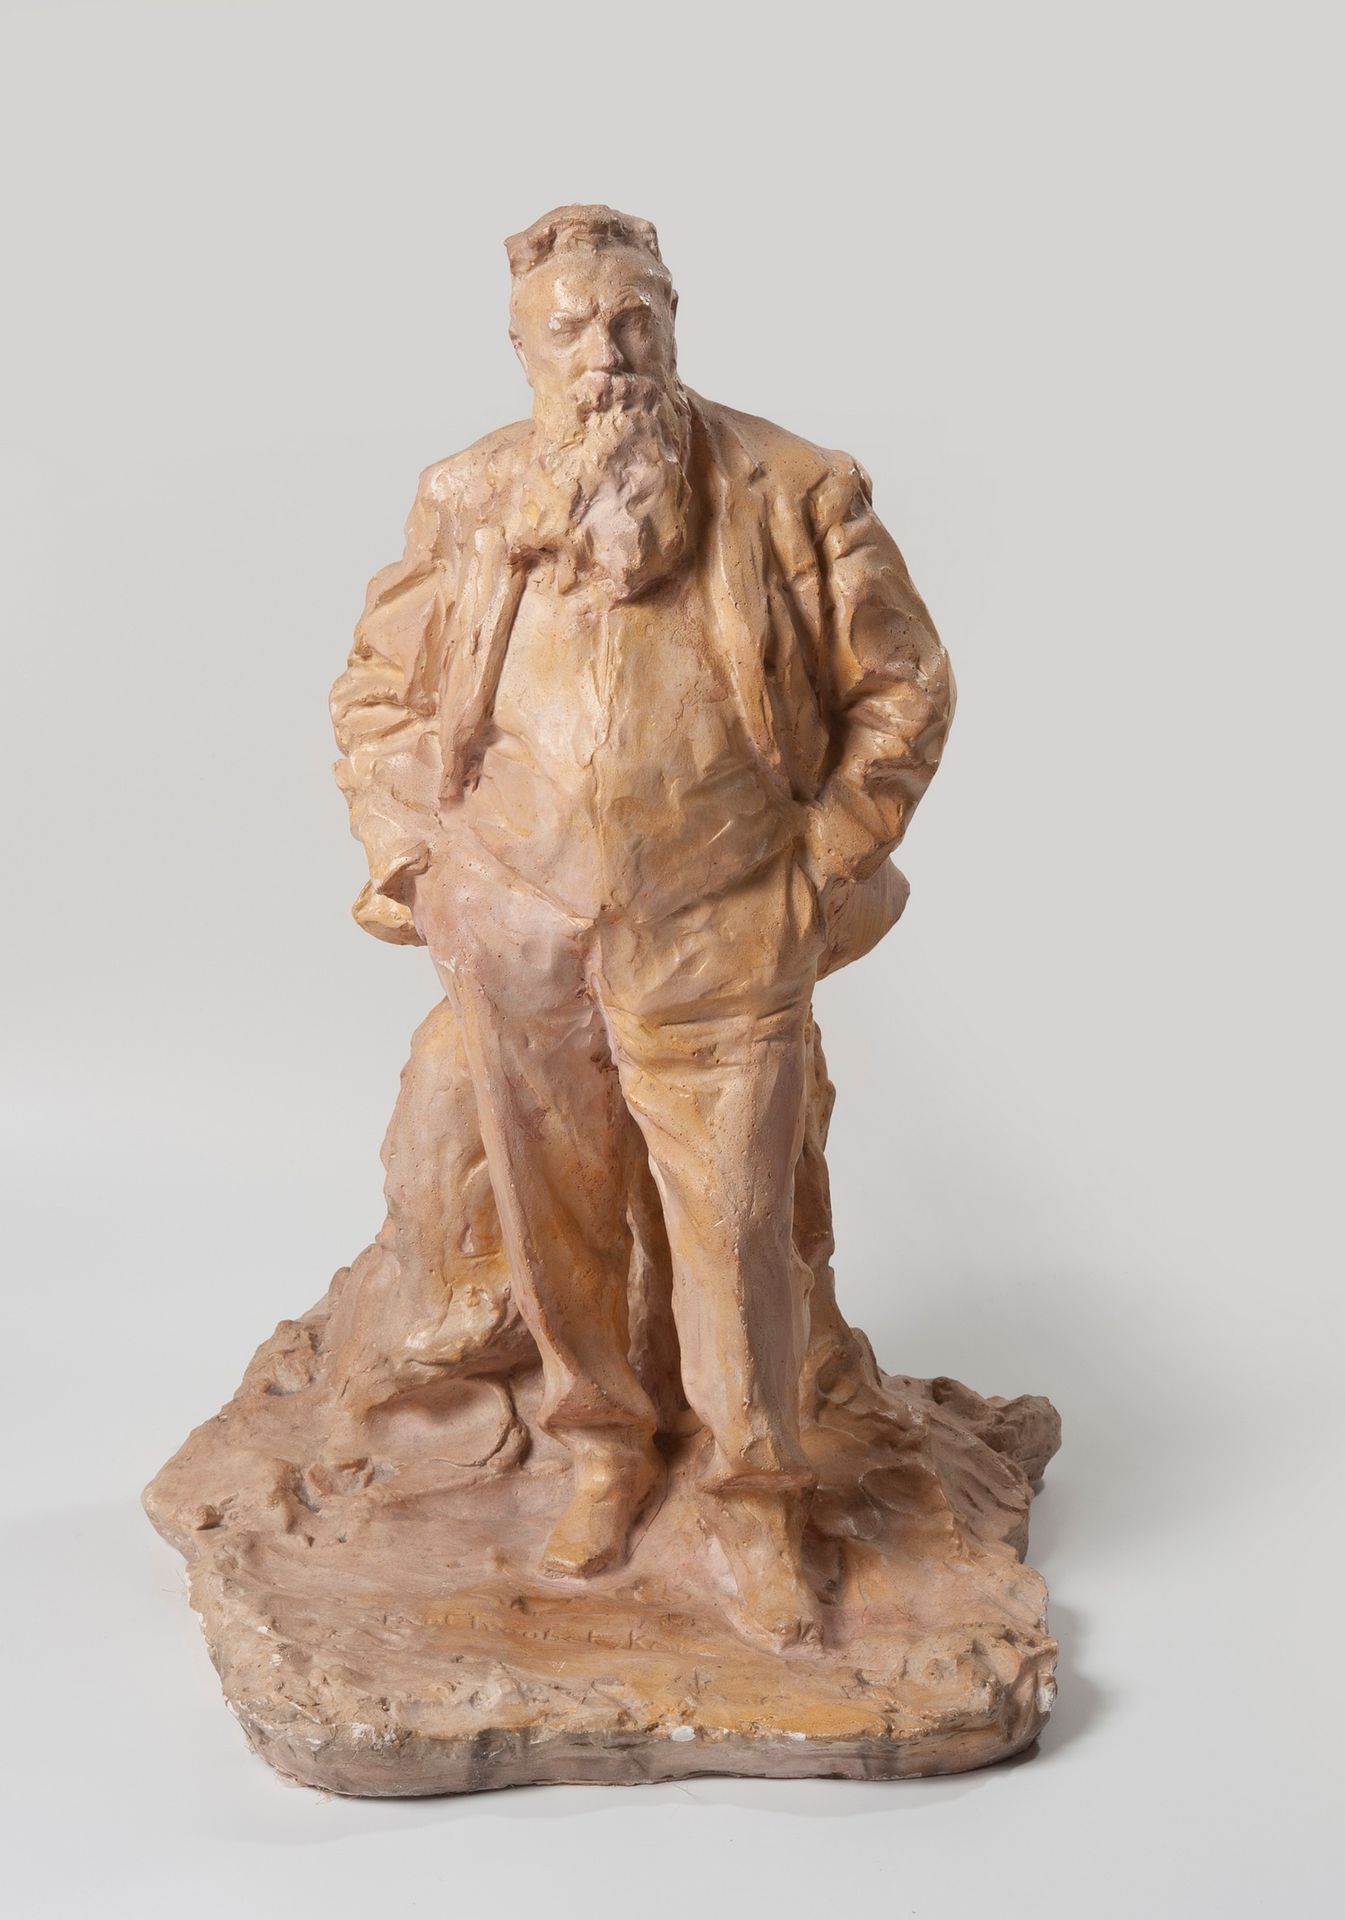 Null Prince Paul TROUBETZKOY ( 1866 -1938 Russia-Italy) after

Auguste Rodin

Pa&hellip;